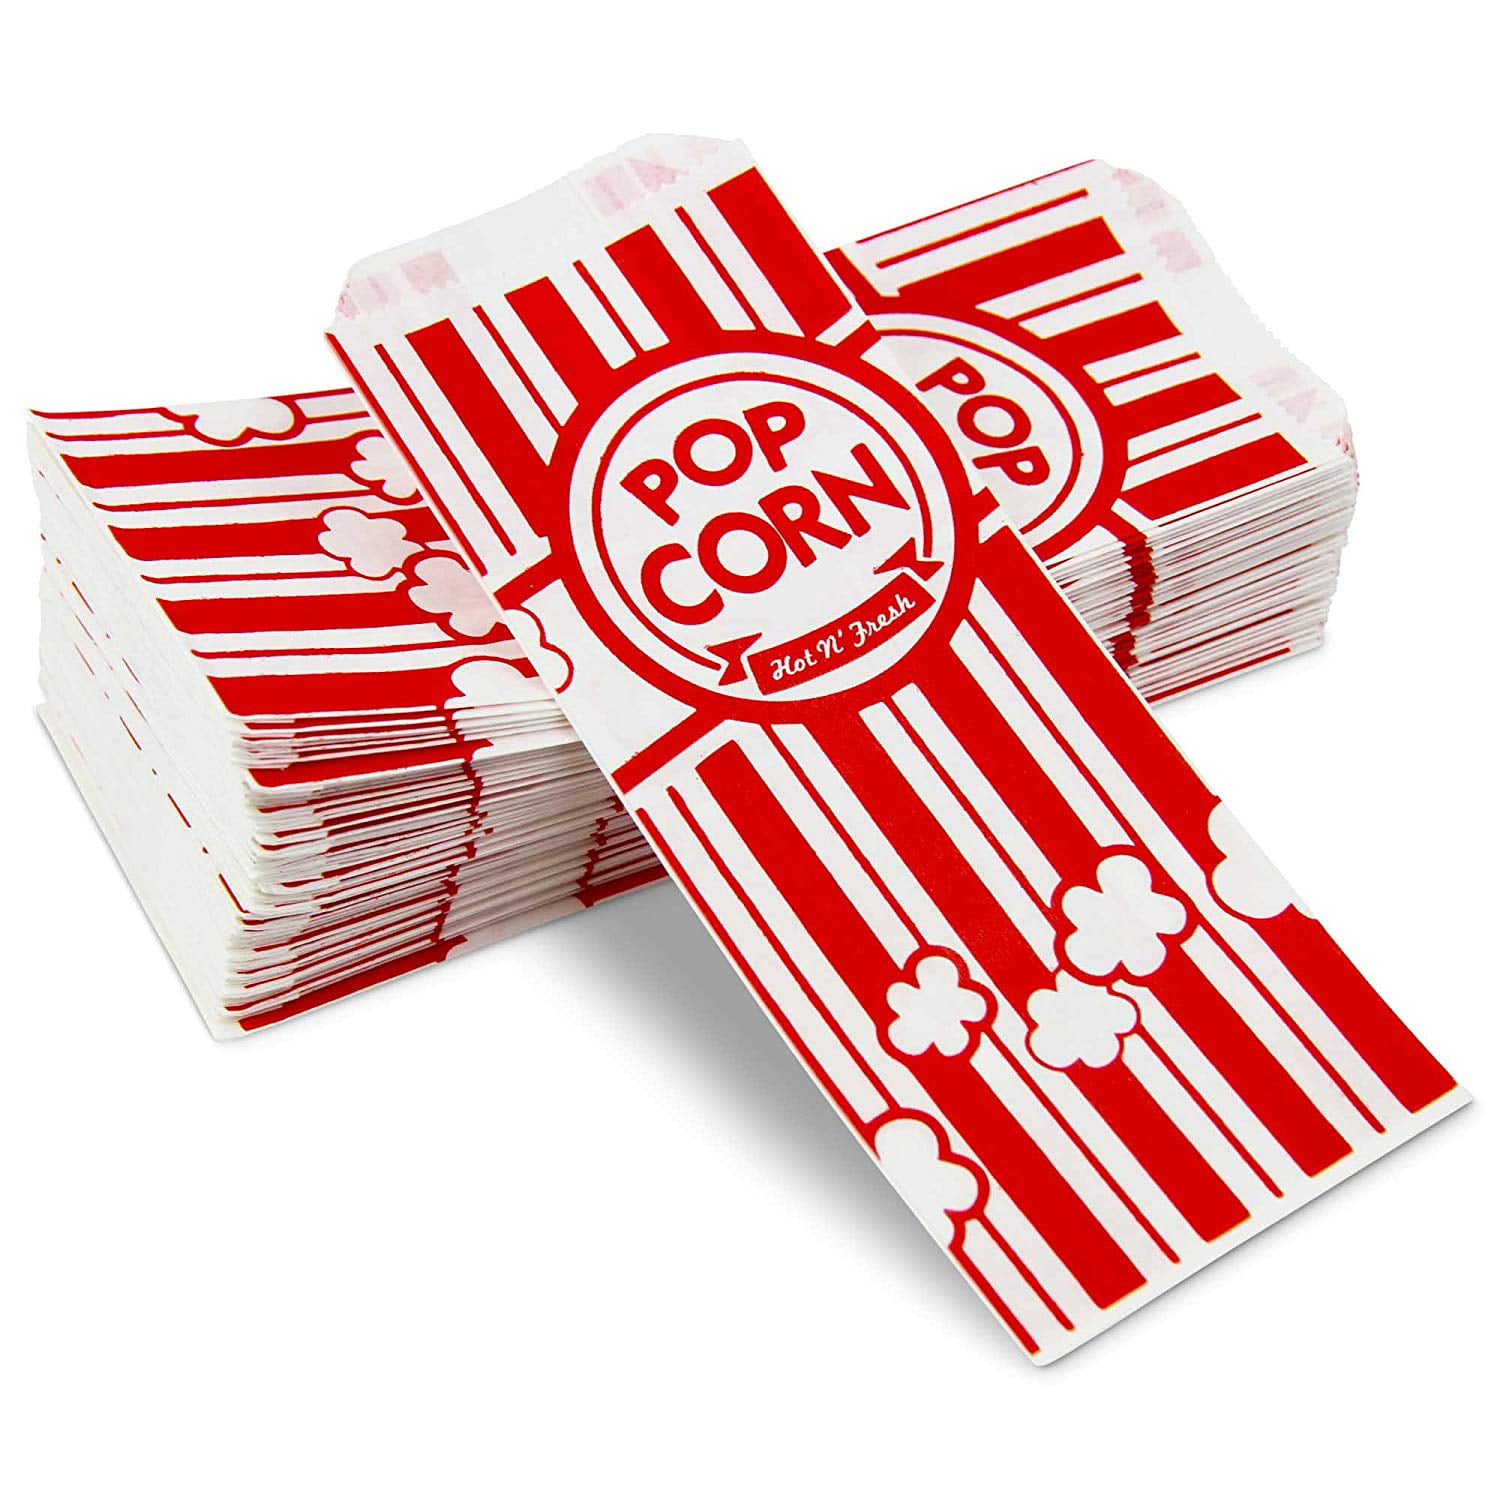 Decorative Accessories Carnival King Paper Popcorn Bags 1 Oz Red White 100 for sale online 